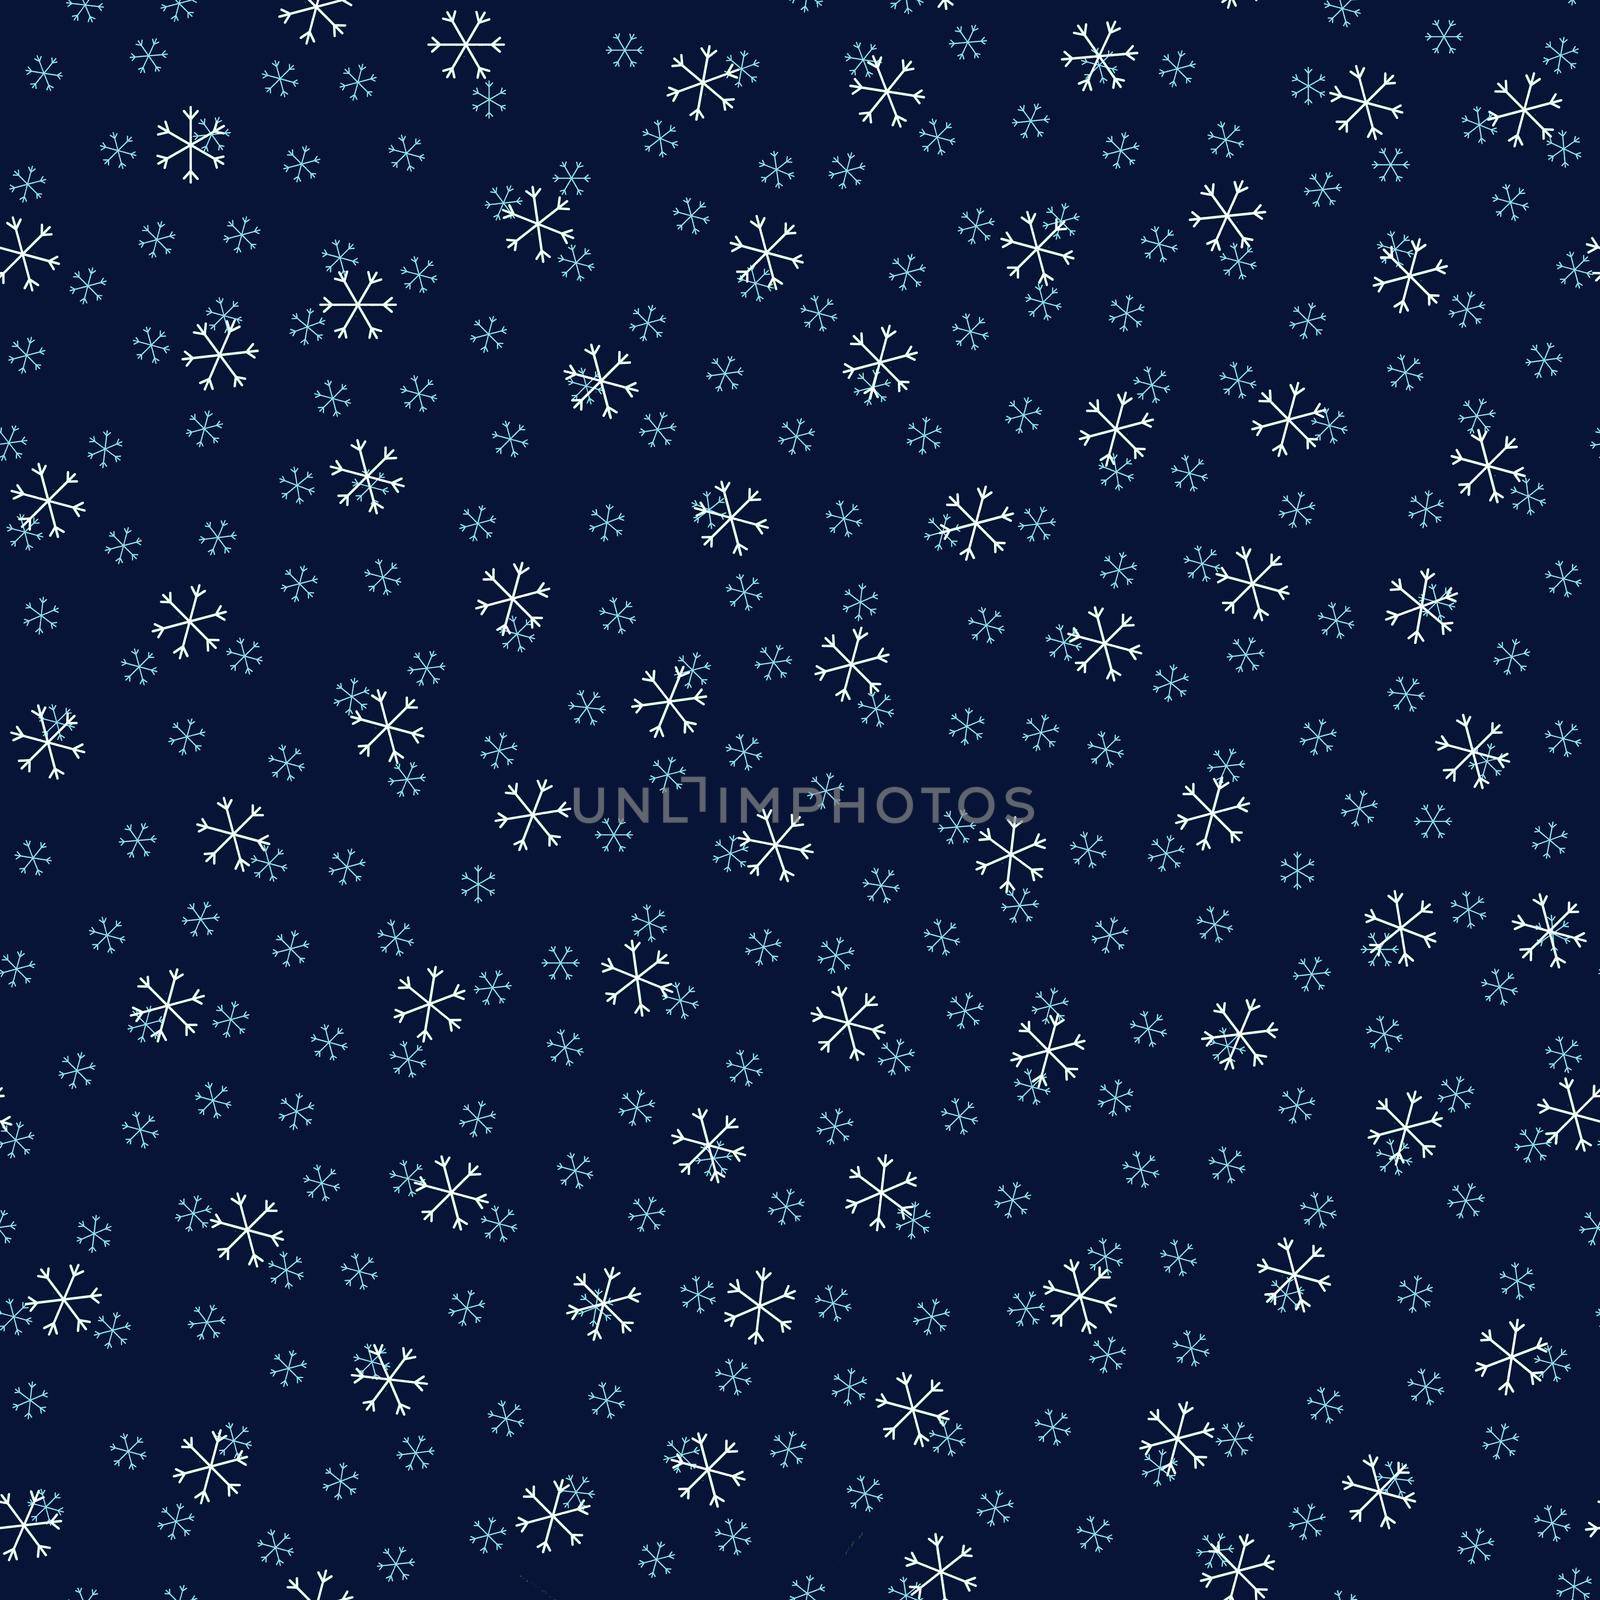 Seamless Christmas pattern doodle with hand random drawn snowflakes.Wrapping paper for presents, funny textile fabric print, design, decor, food wrap, backgrounds. new year.Raster copy.Blue white